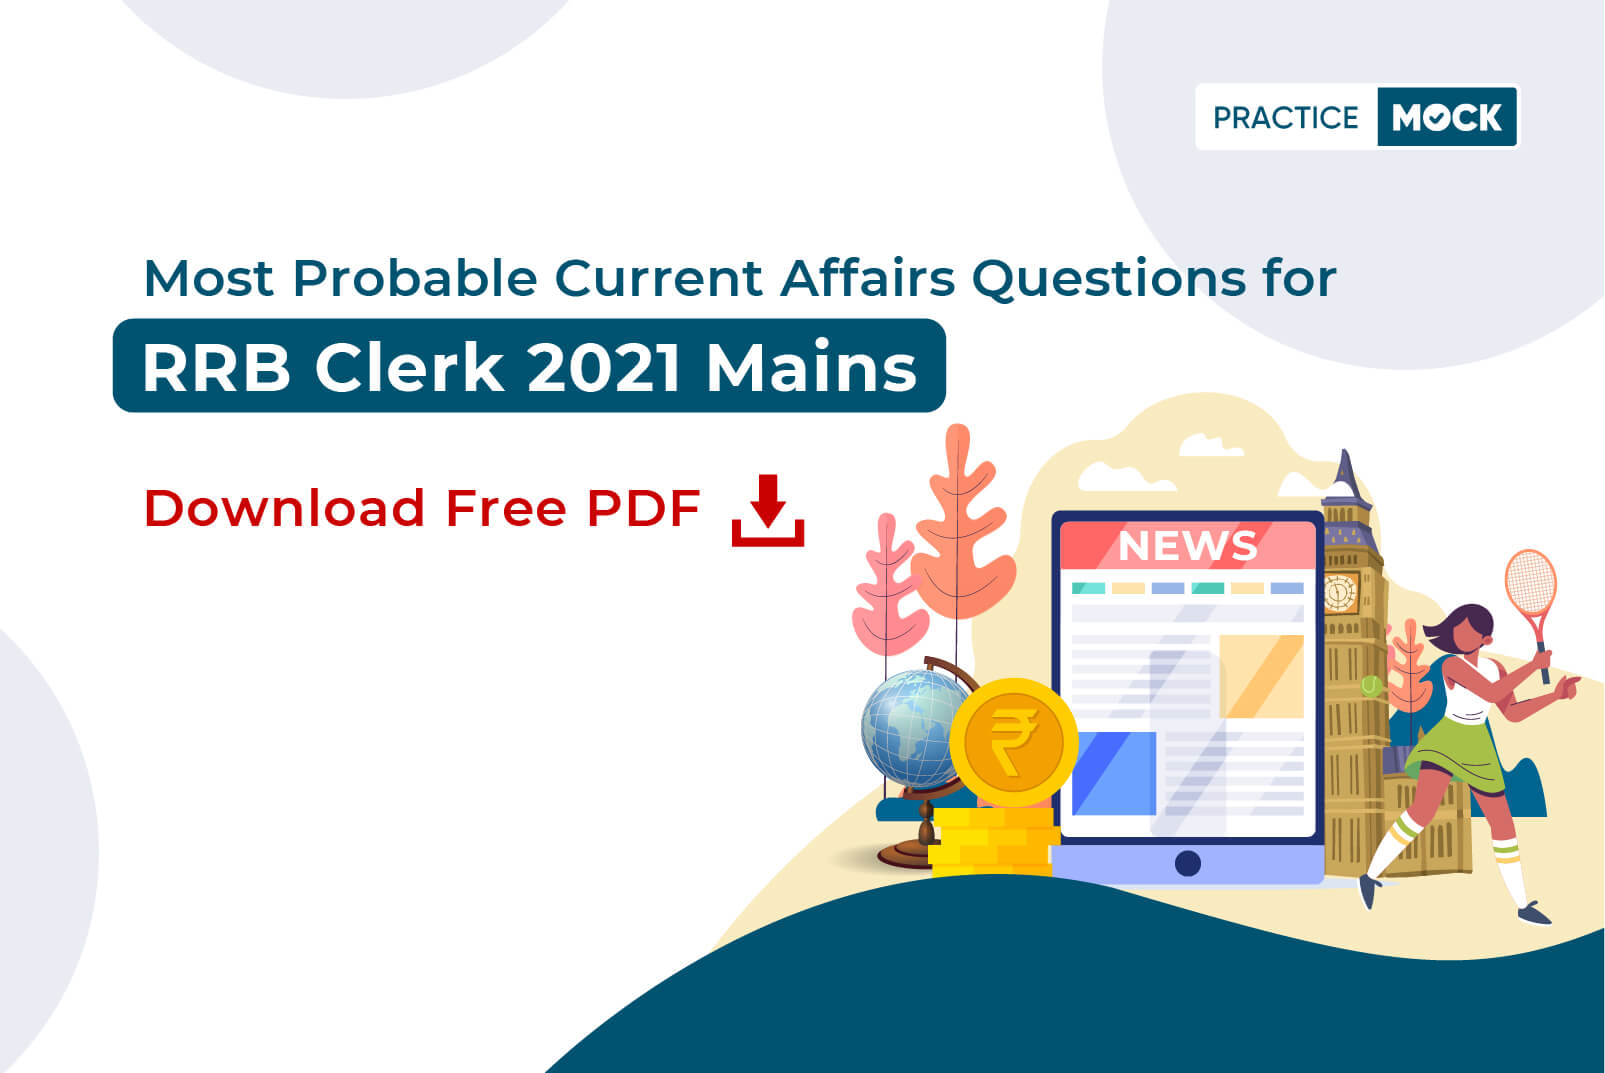 Most Probable 500+ CA Questions for RRB Clerk 2021 Mains